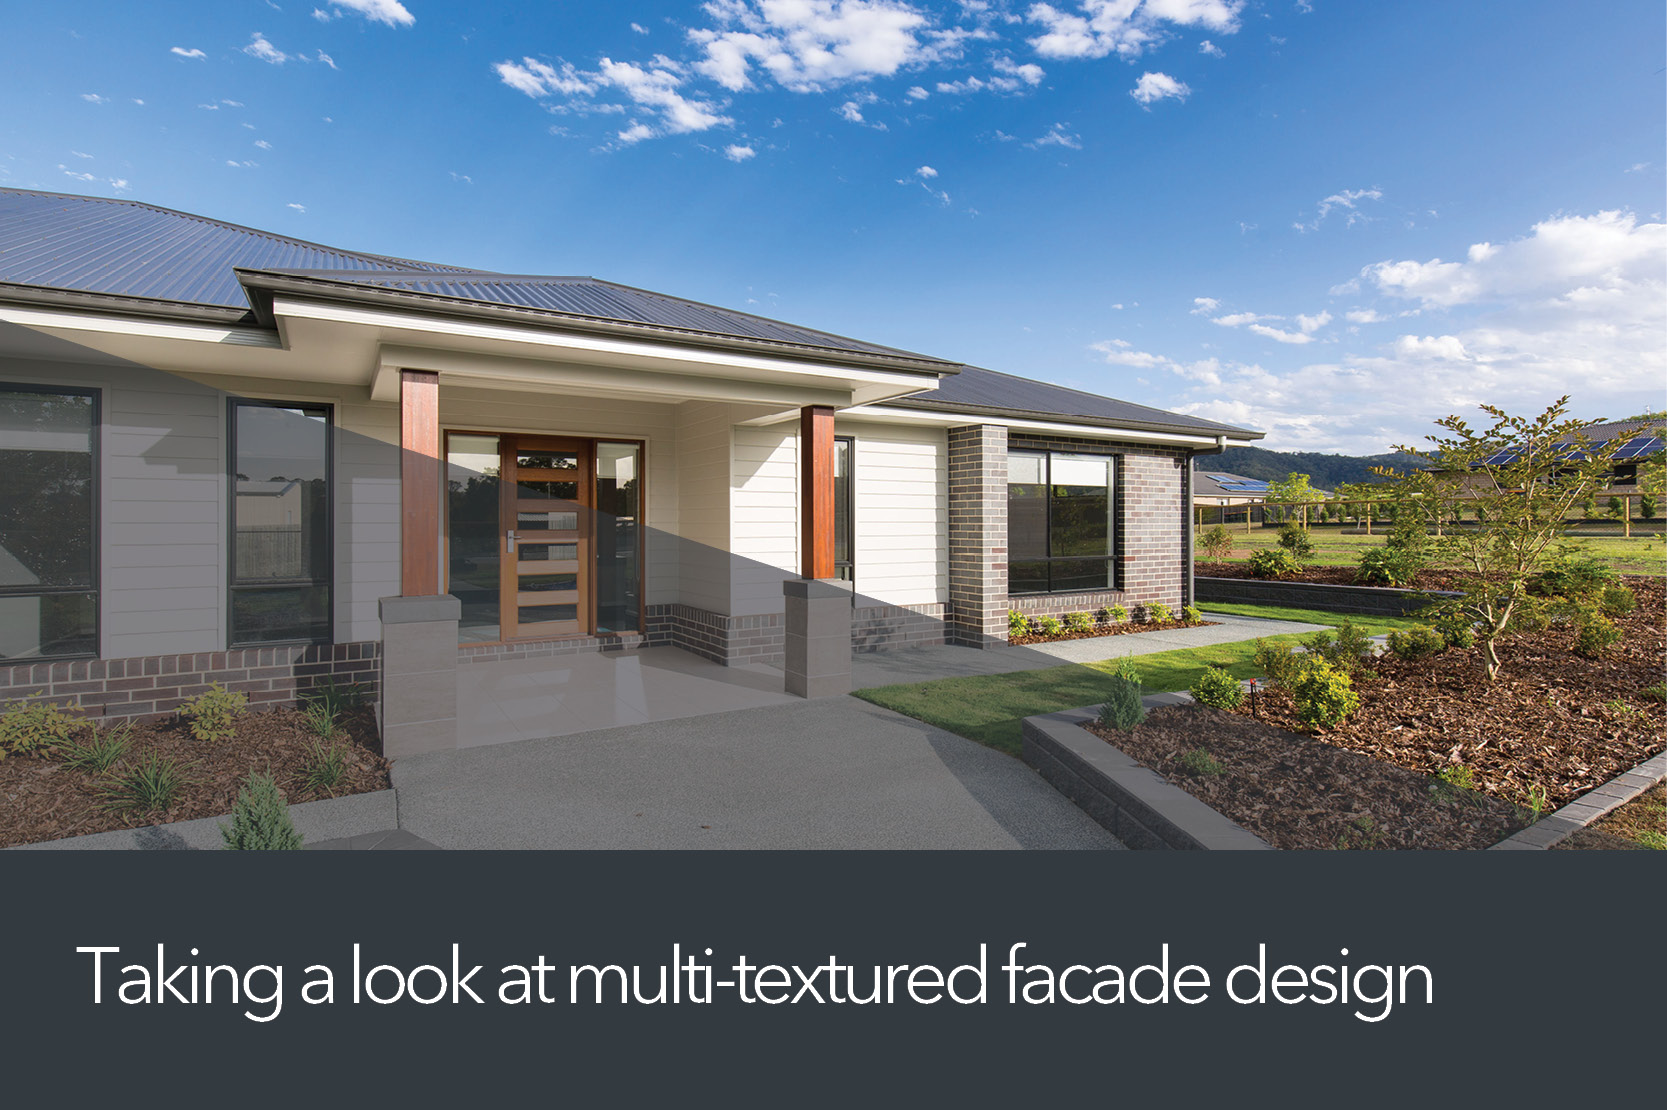 Taking a look at multi-textured facade design